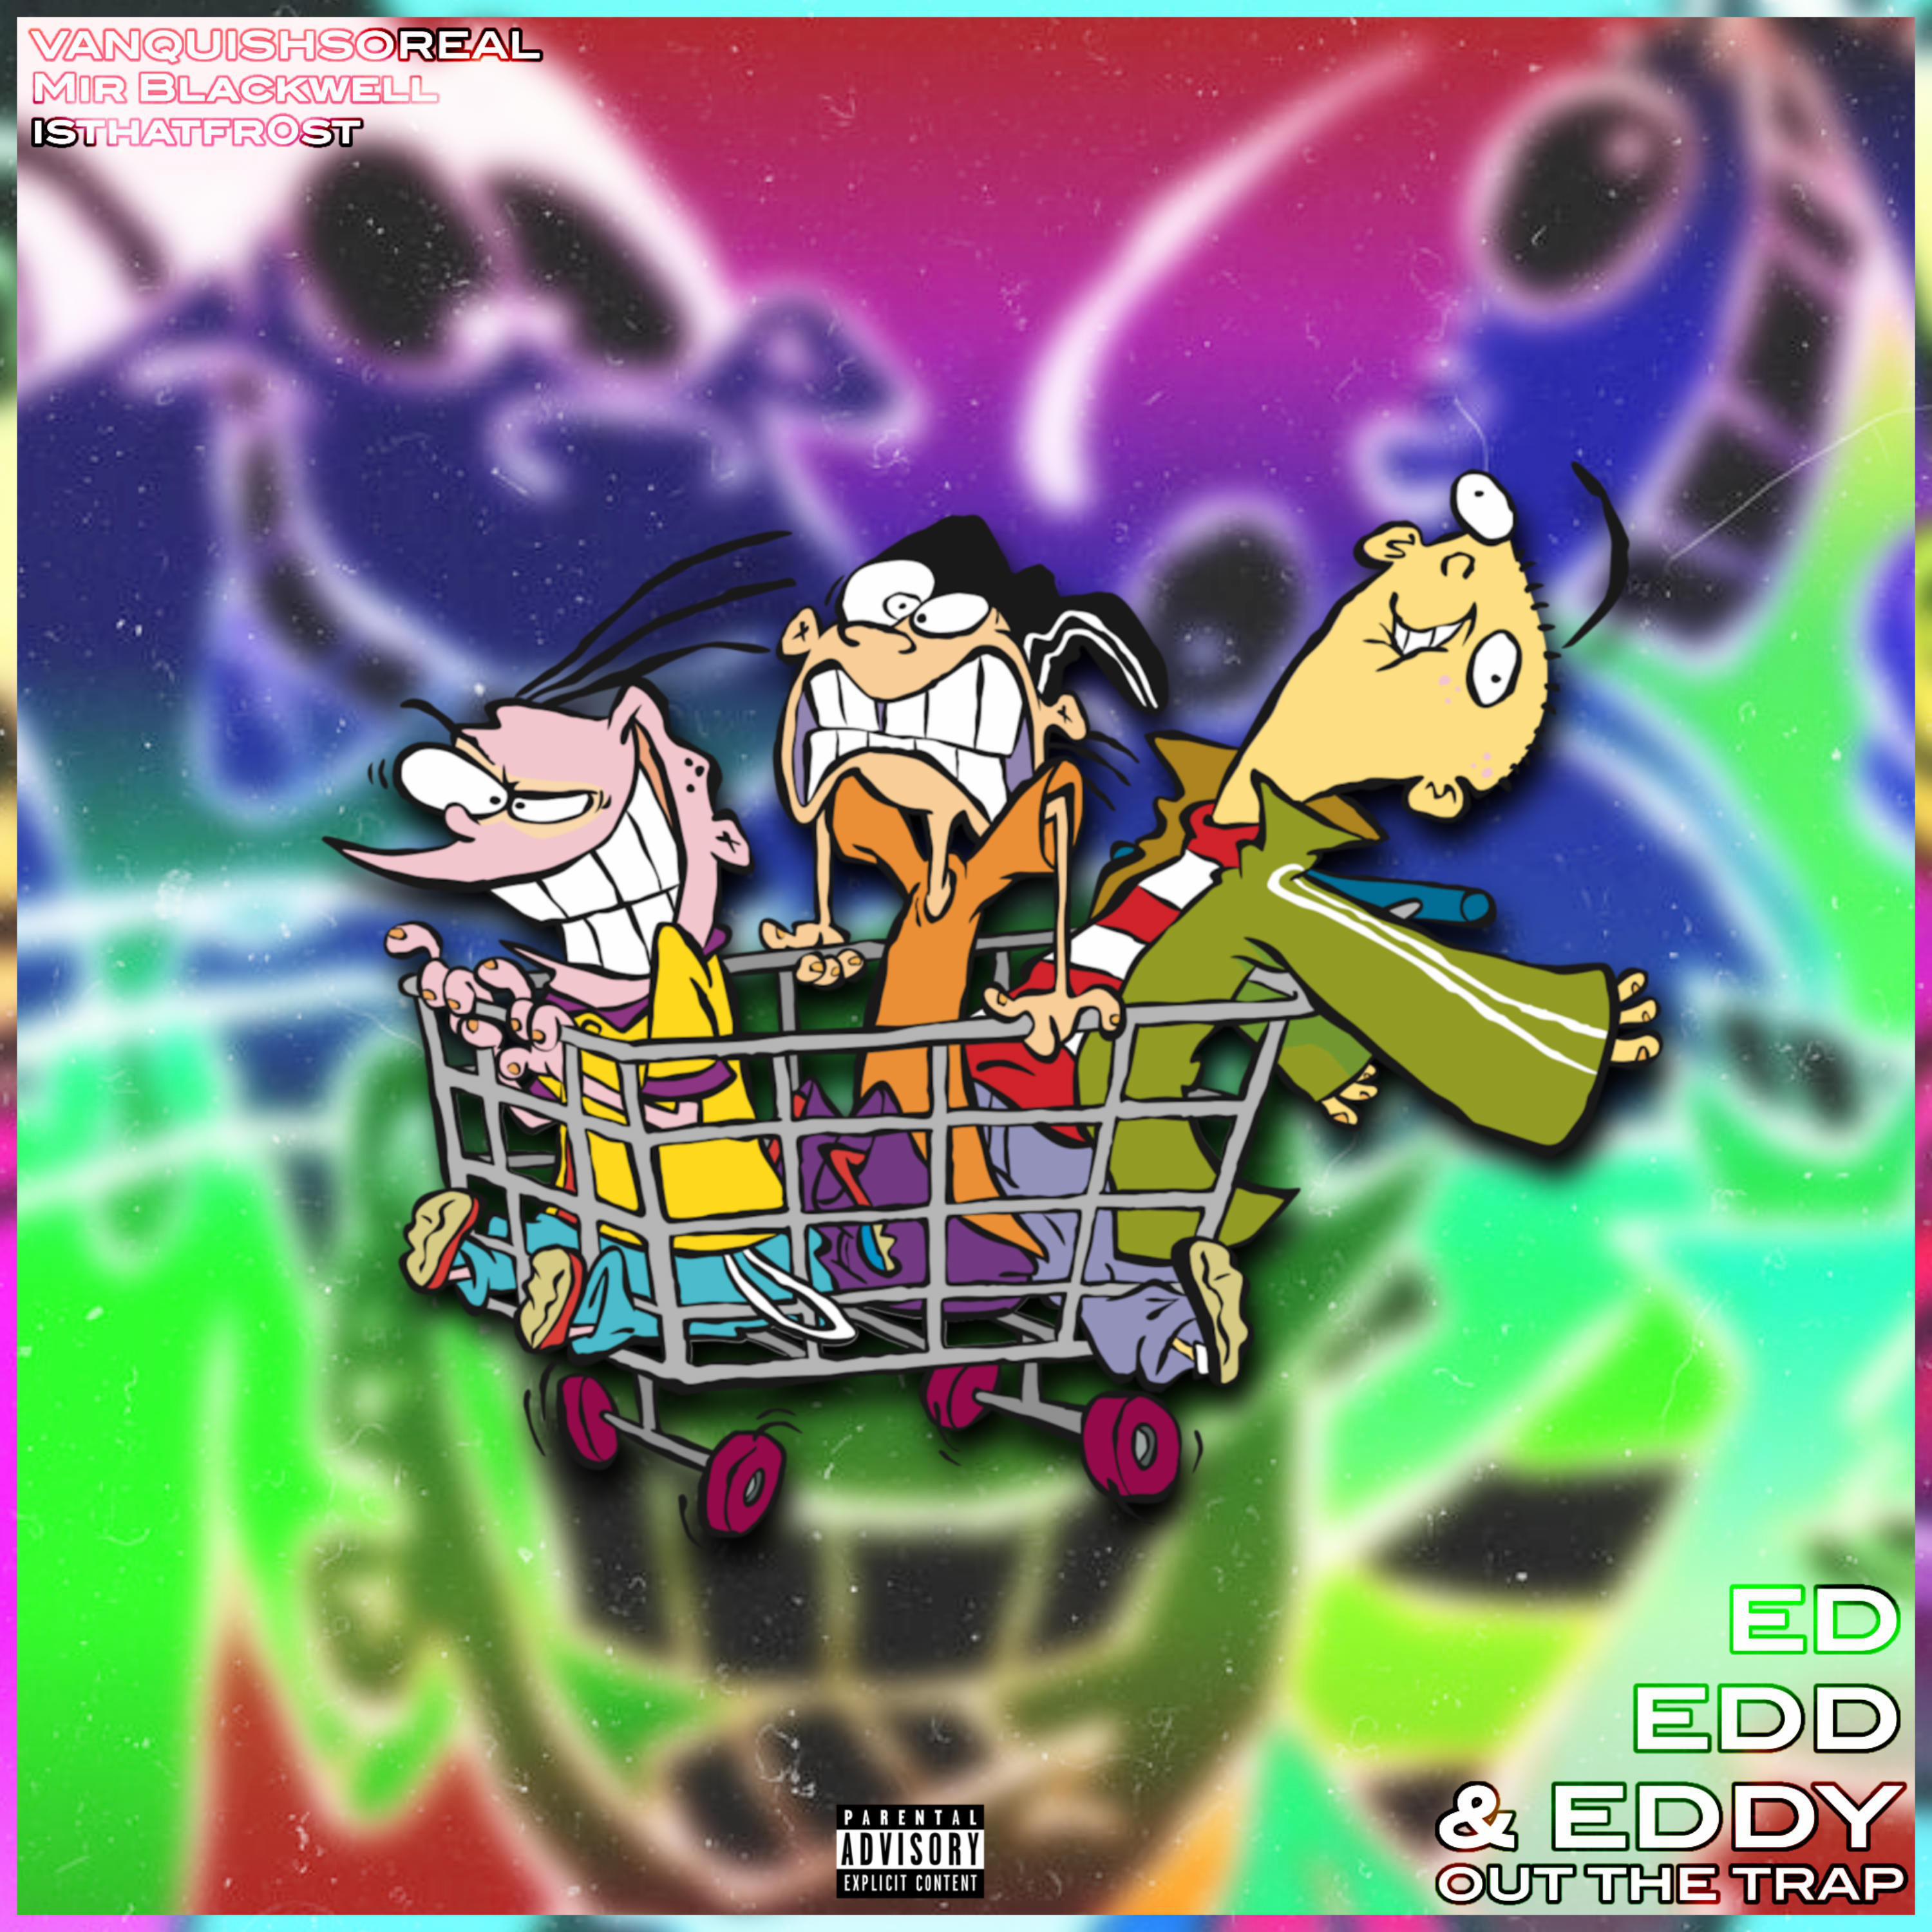 Vanquish - Ed, Edd, and Eddy (Out The Trap) (feat. Mir Blackwell & Sivade)